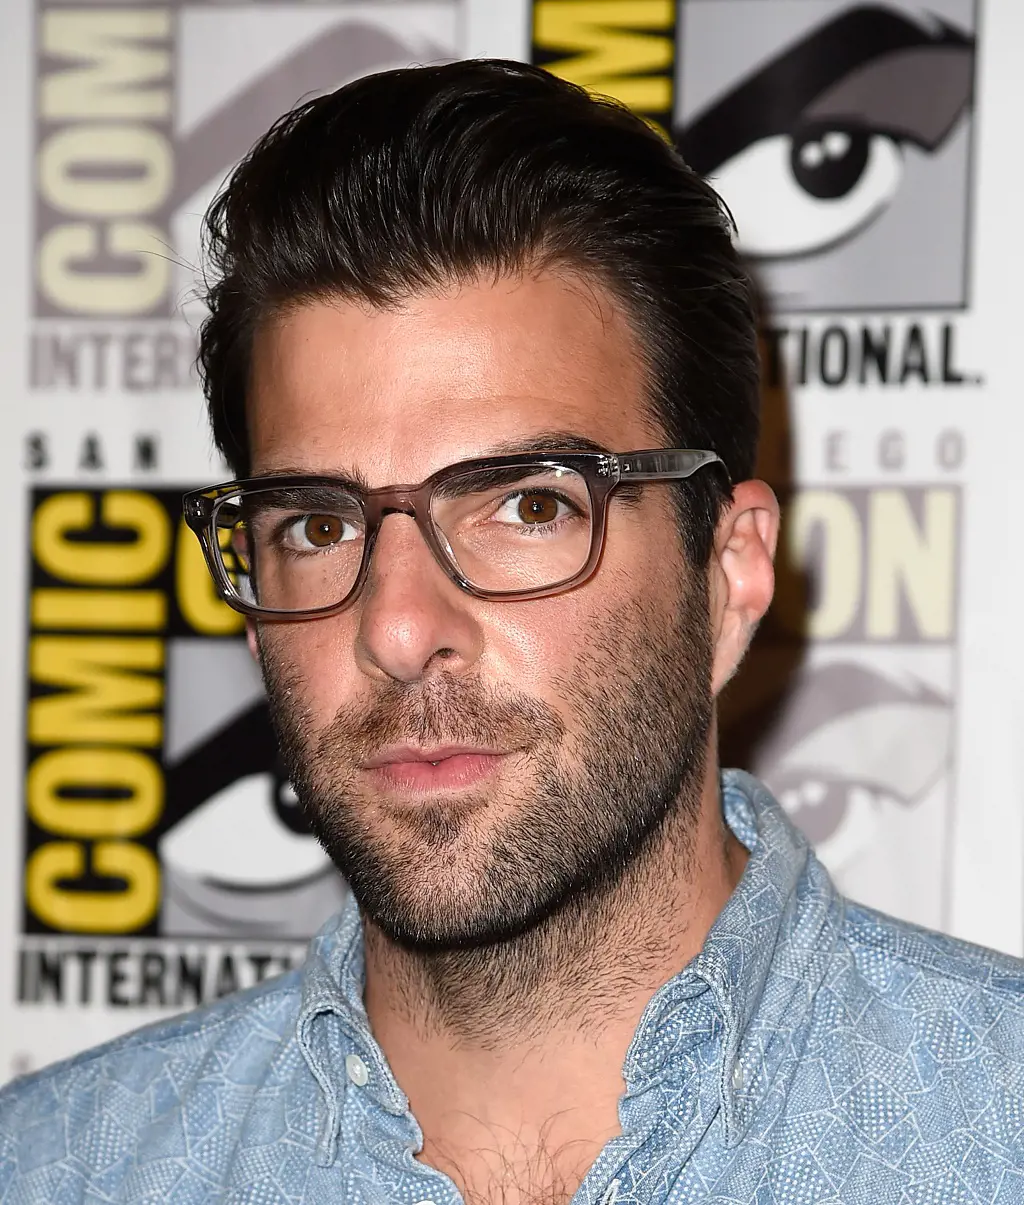 Quinto is known for starring in the Star Trek series and American Horror Story: Asylum.